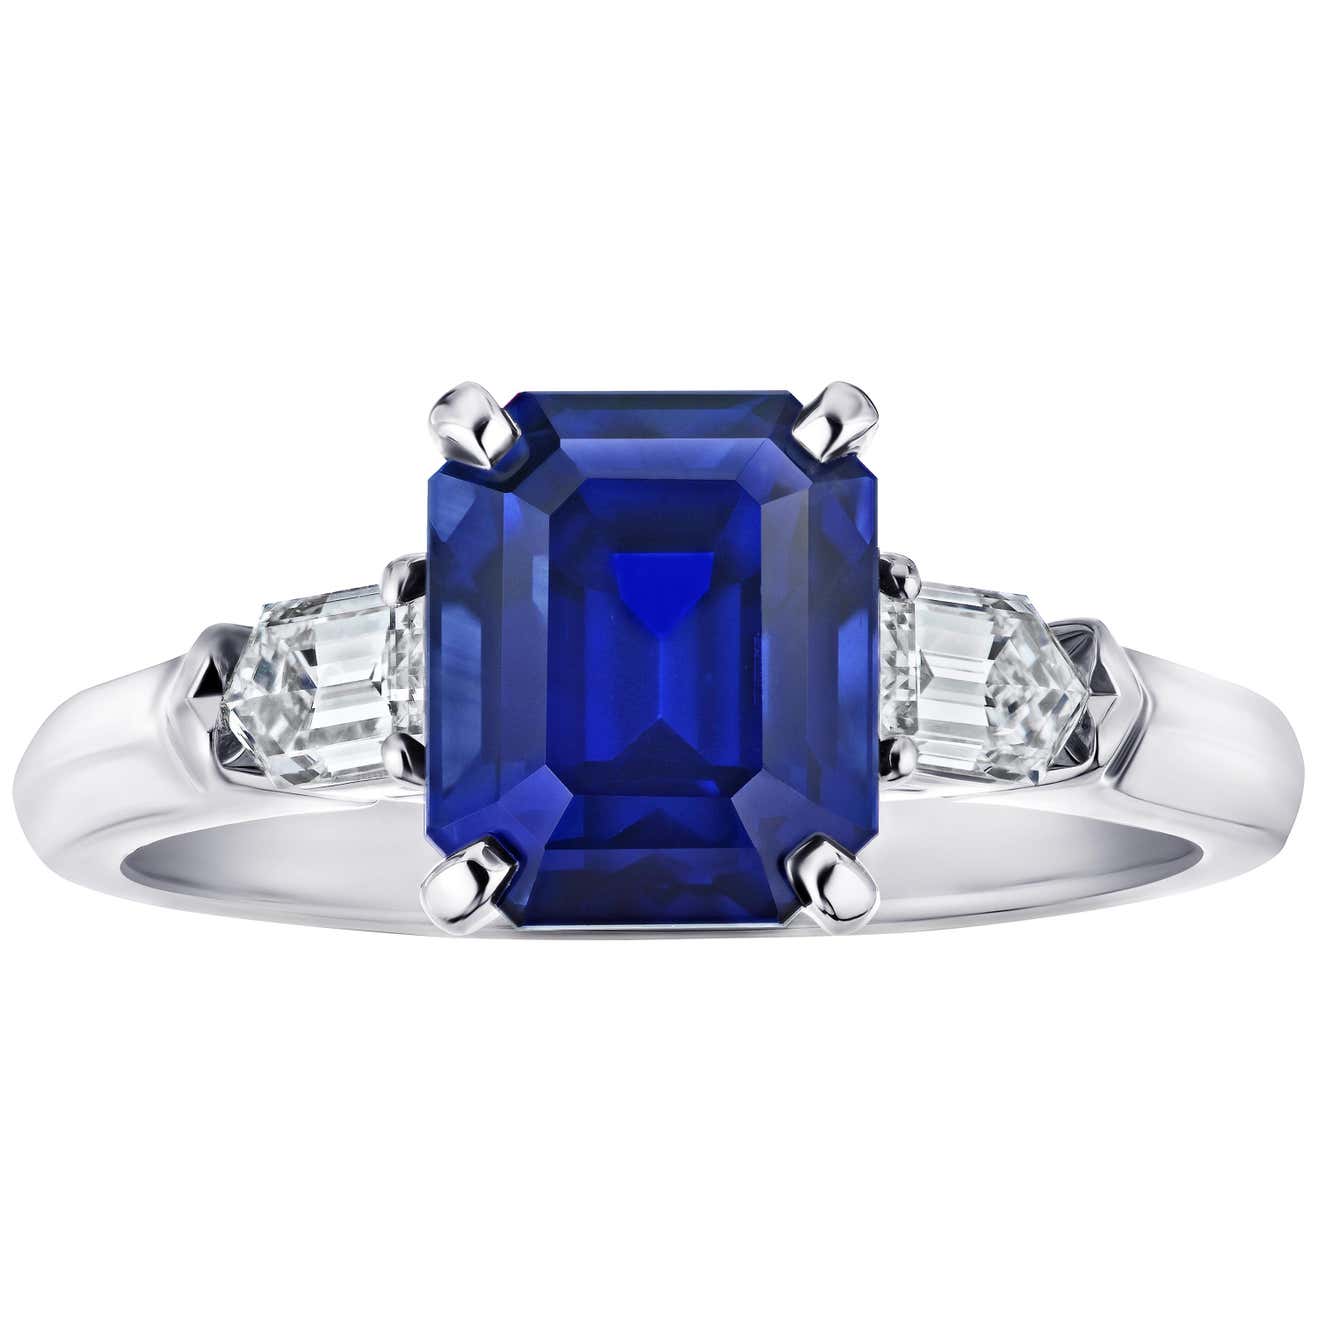 3.72 Carat Emerald Cut Blue Sapphire and Diamond Ring For Sale at 1stDibs